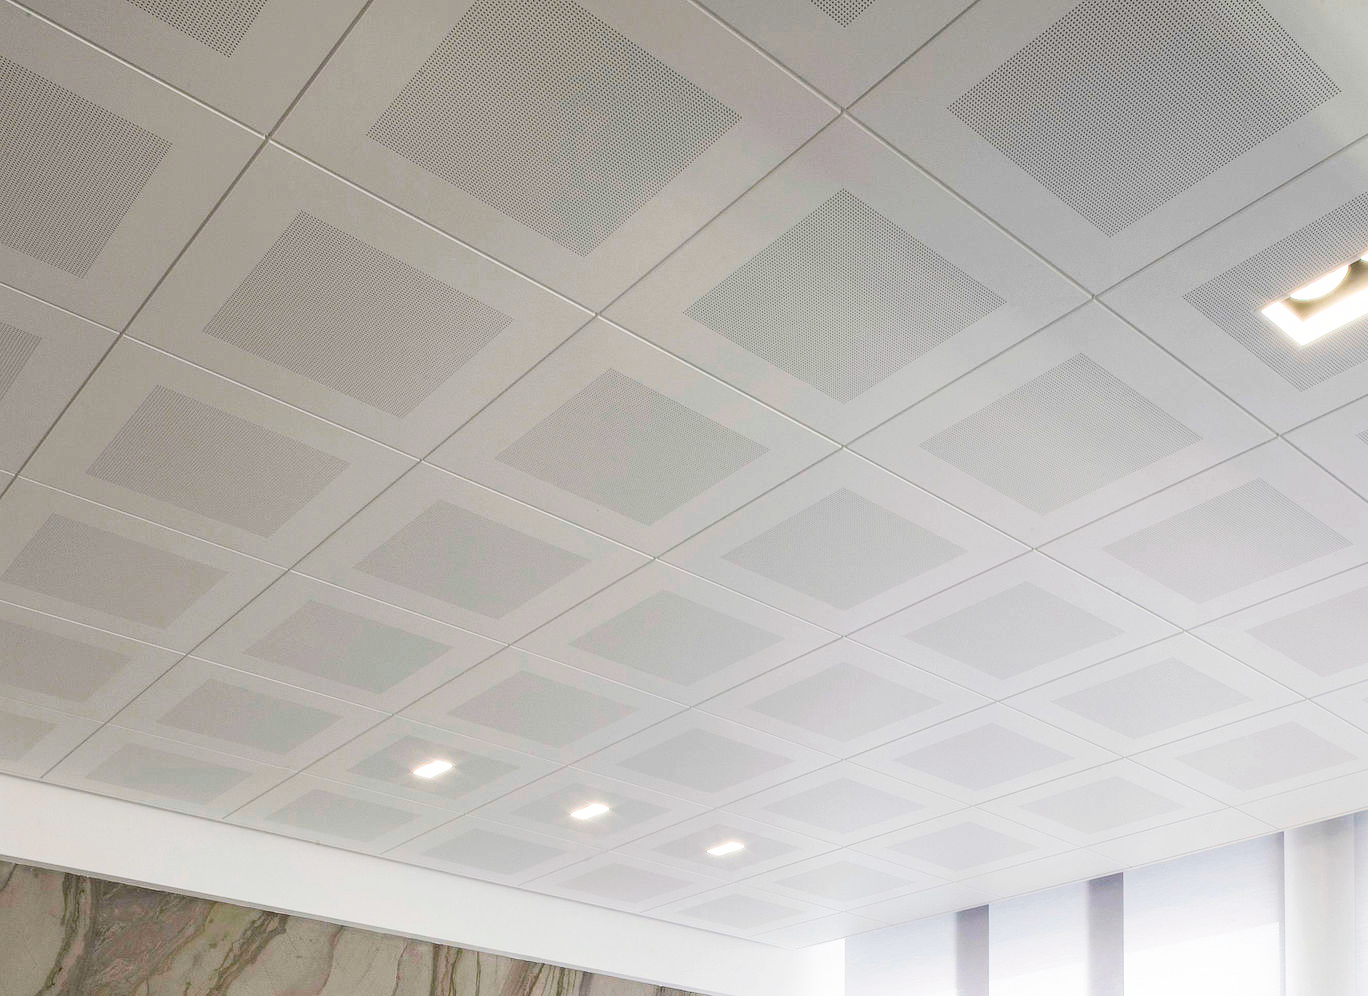 Perforated Ceiling Panels Branko, Perforated Metal Ceiling Tiles Suppliers